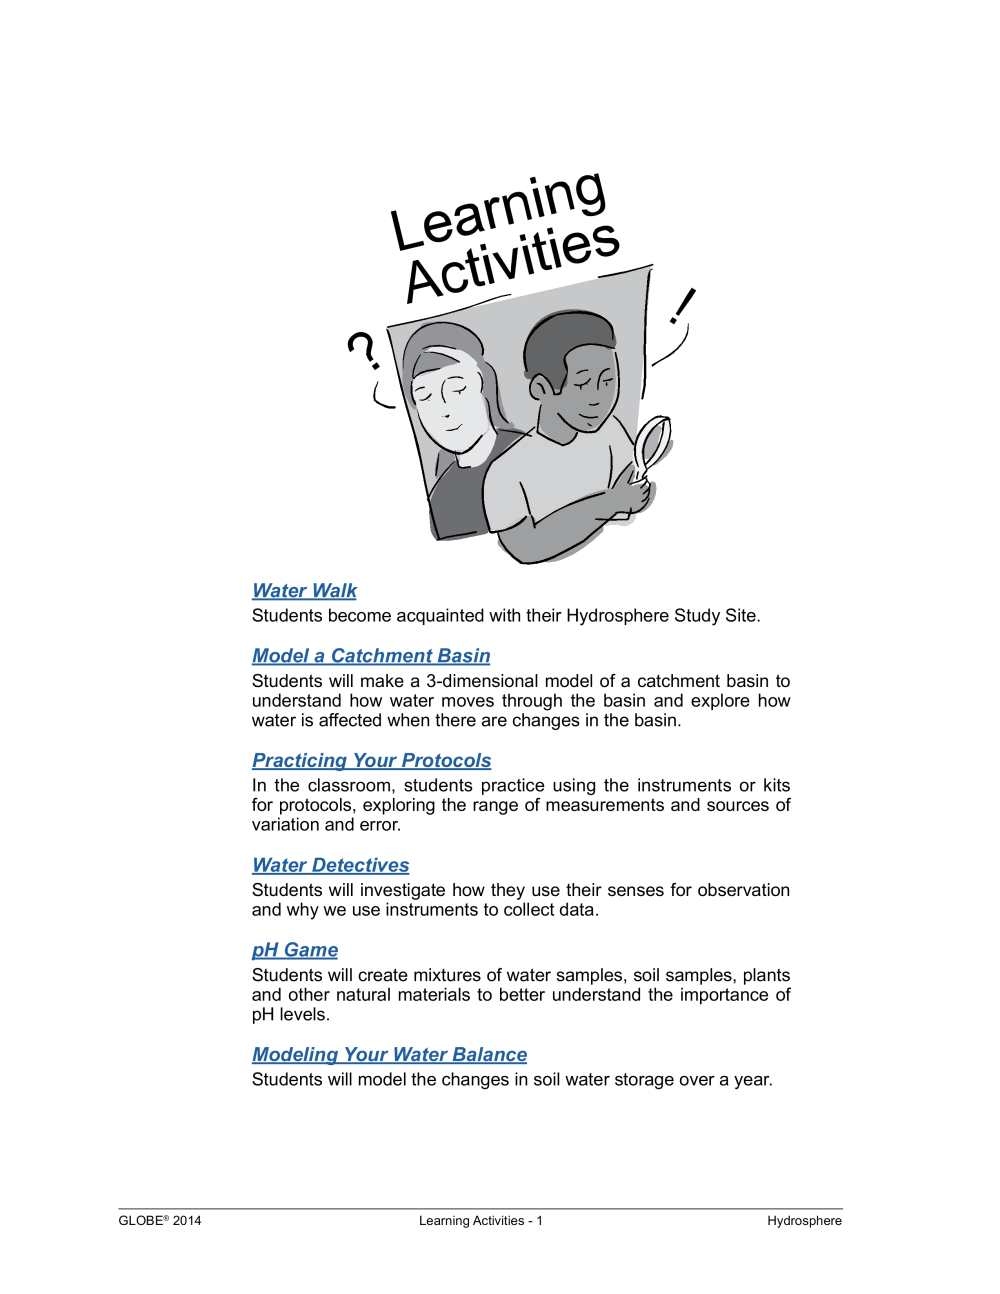 Learning Activities preview for Hydrosphere Learning Activities